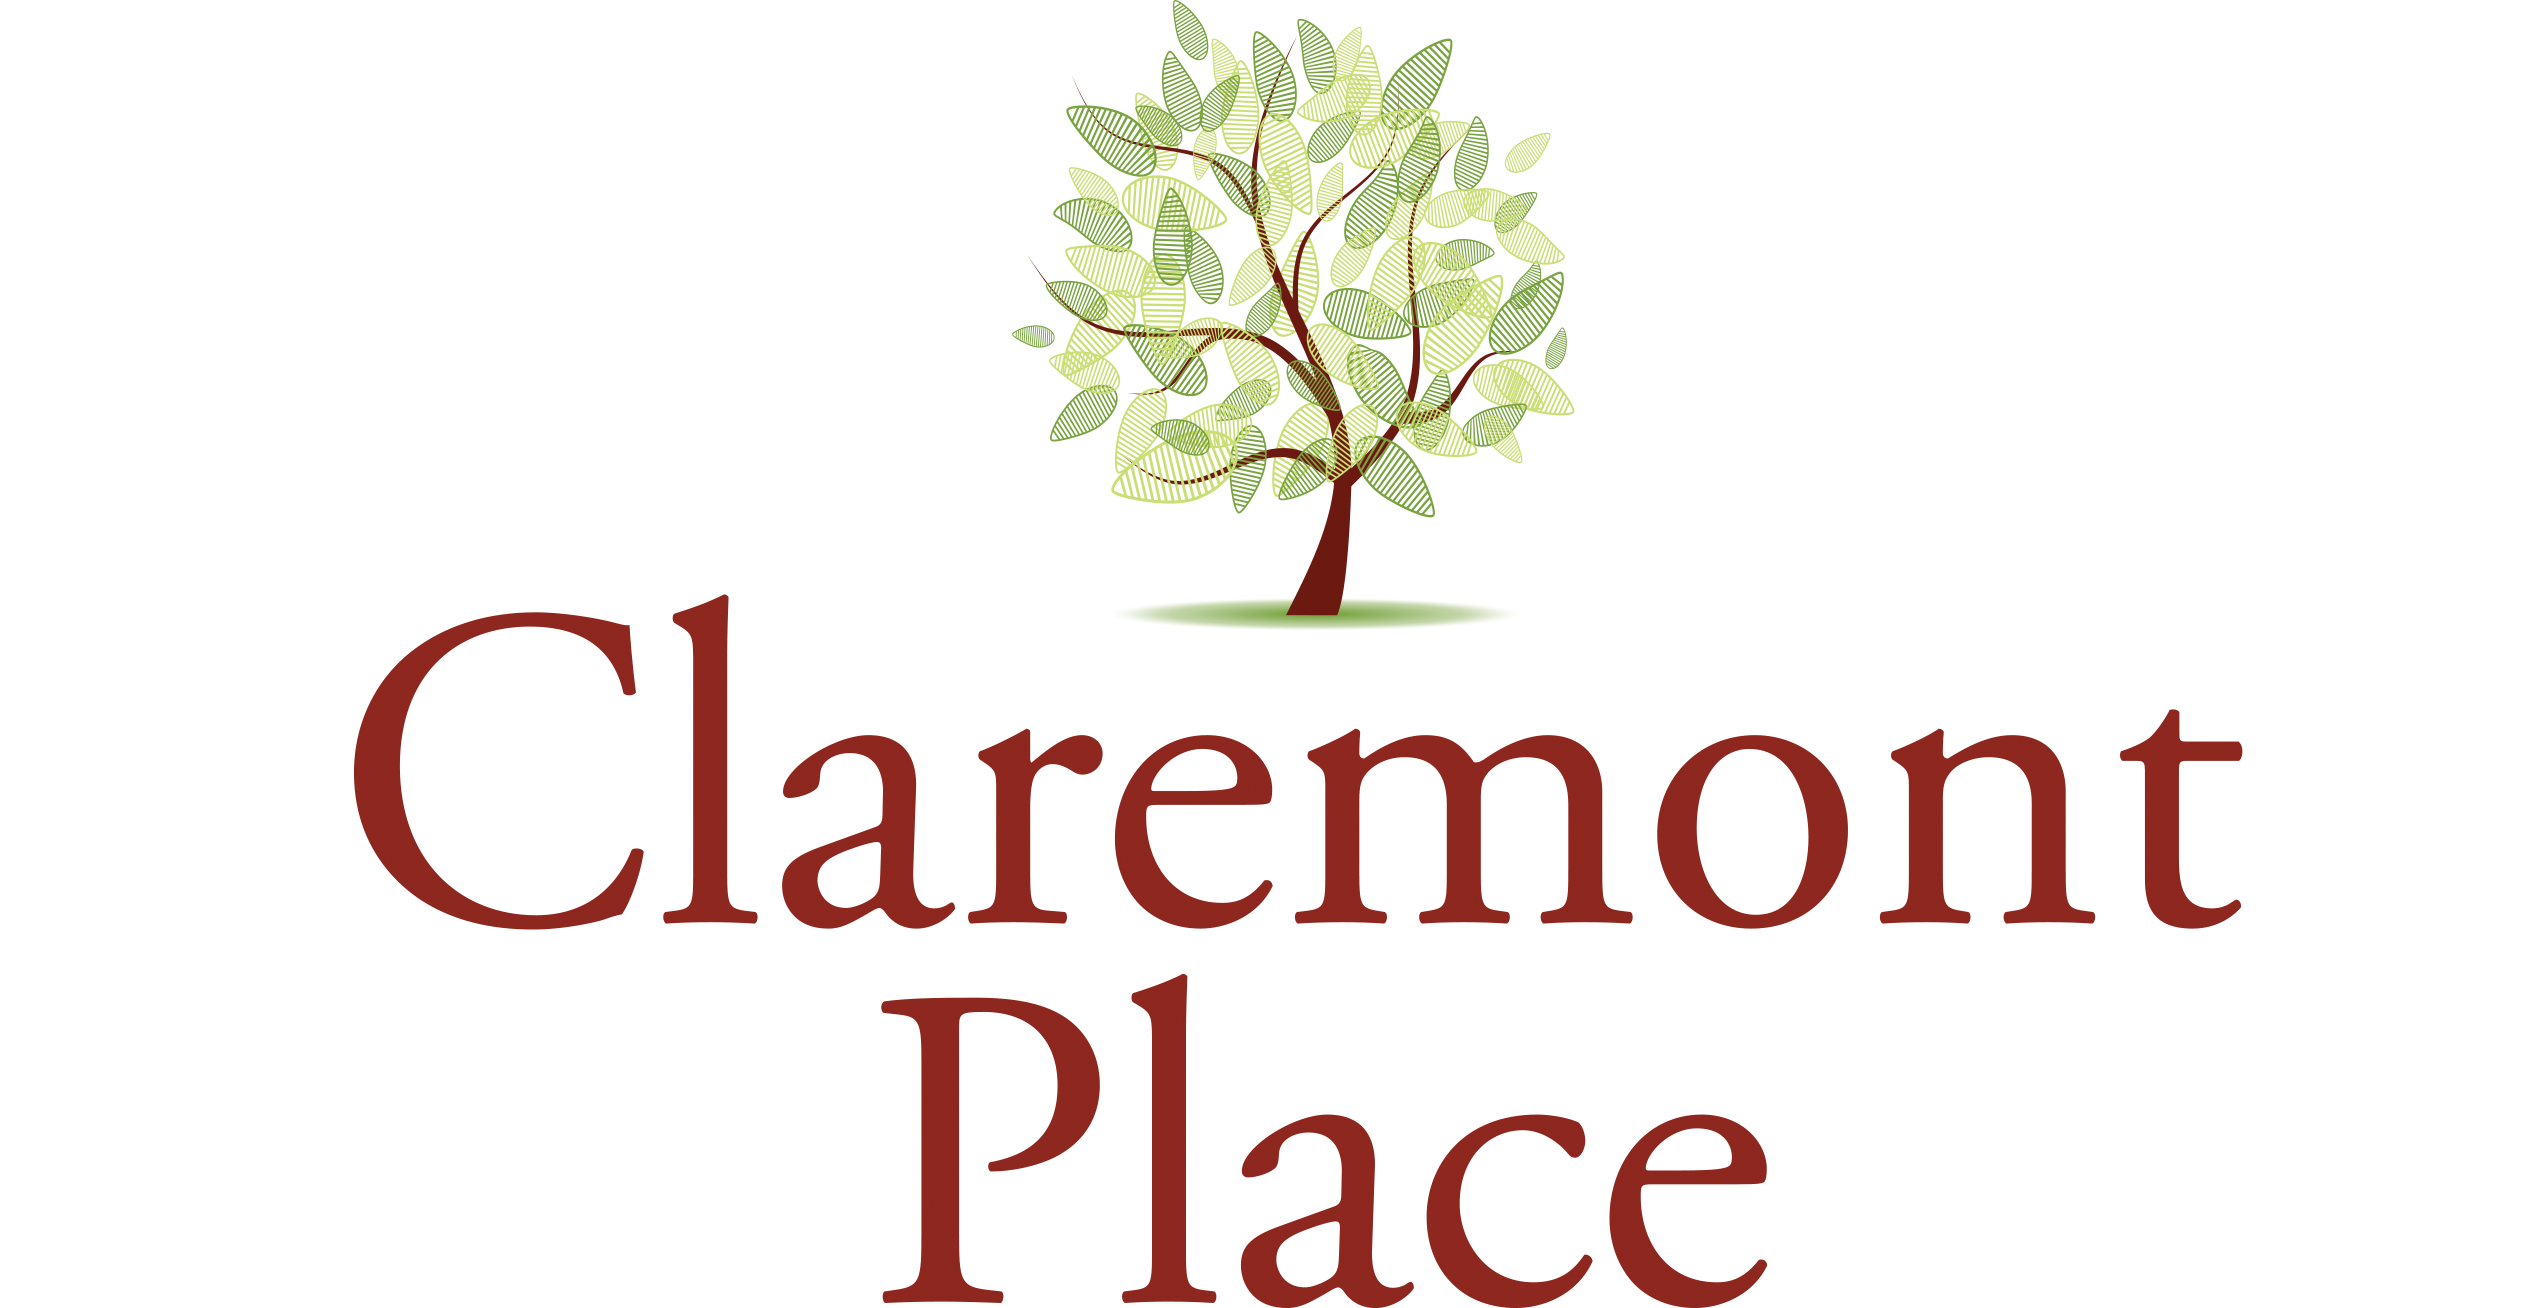 2. Claremont Place (Silver)